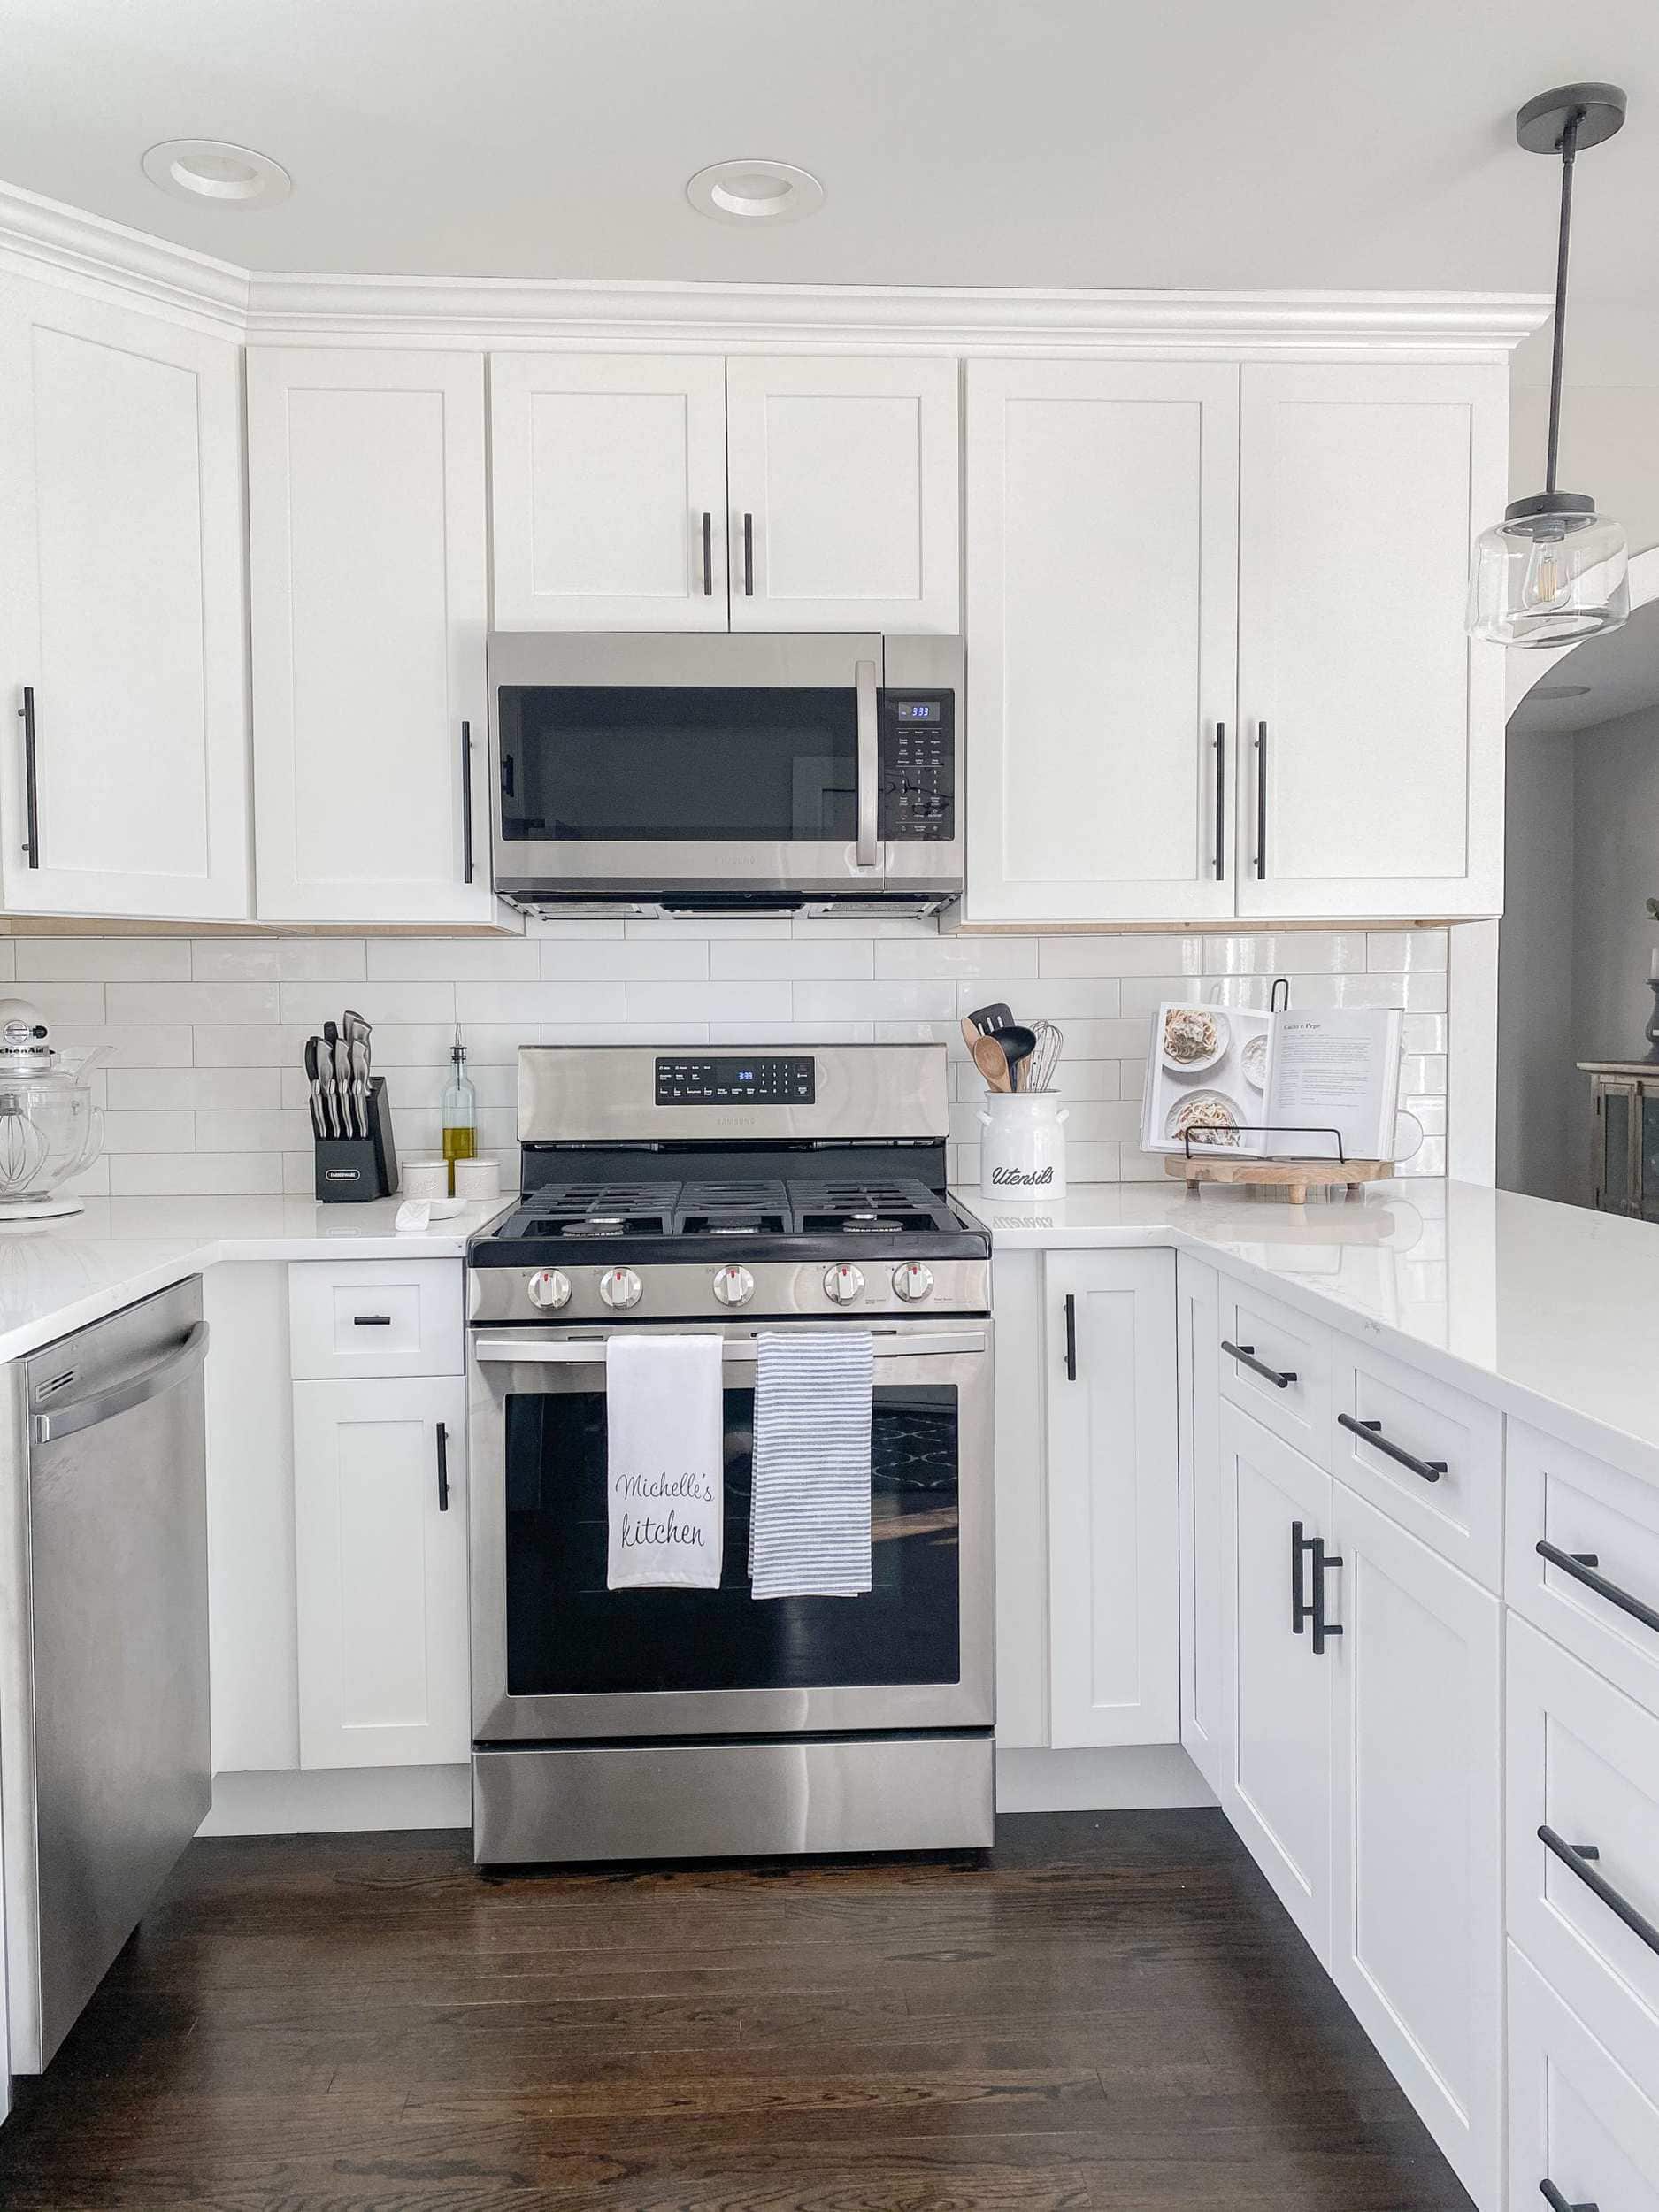 the after of the kitchen renovation with white shaker style cabinets, black modern farmhouse pulls, black simple schoolhouse pendants, and samsung appliances 